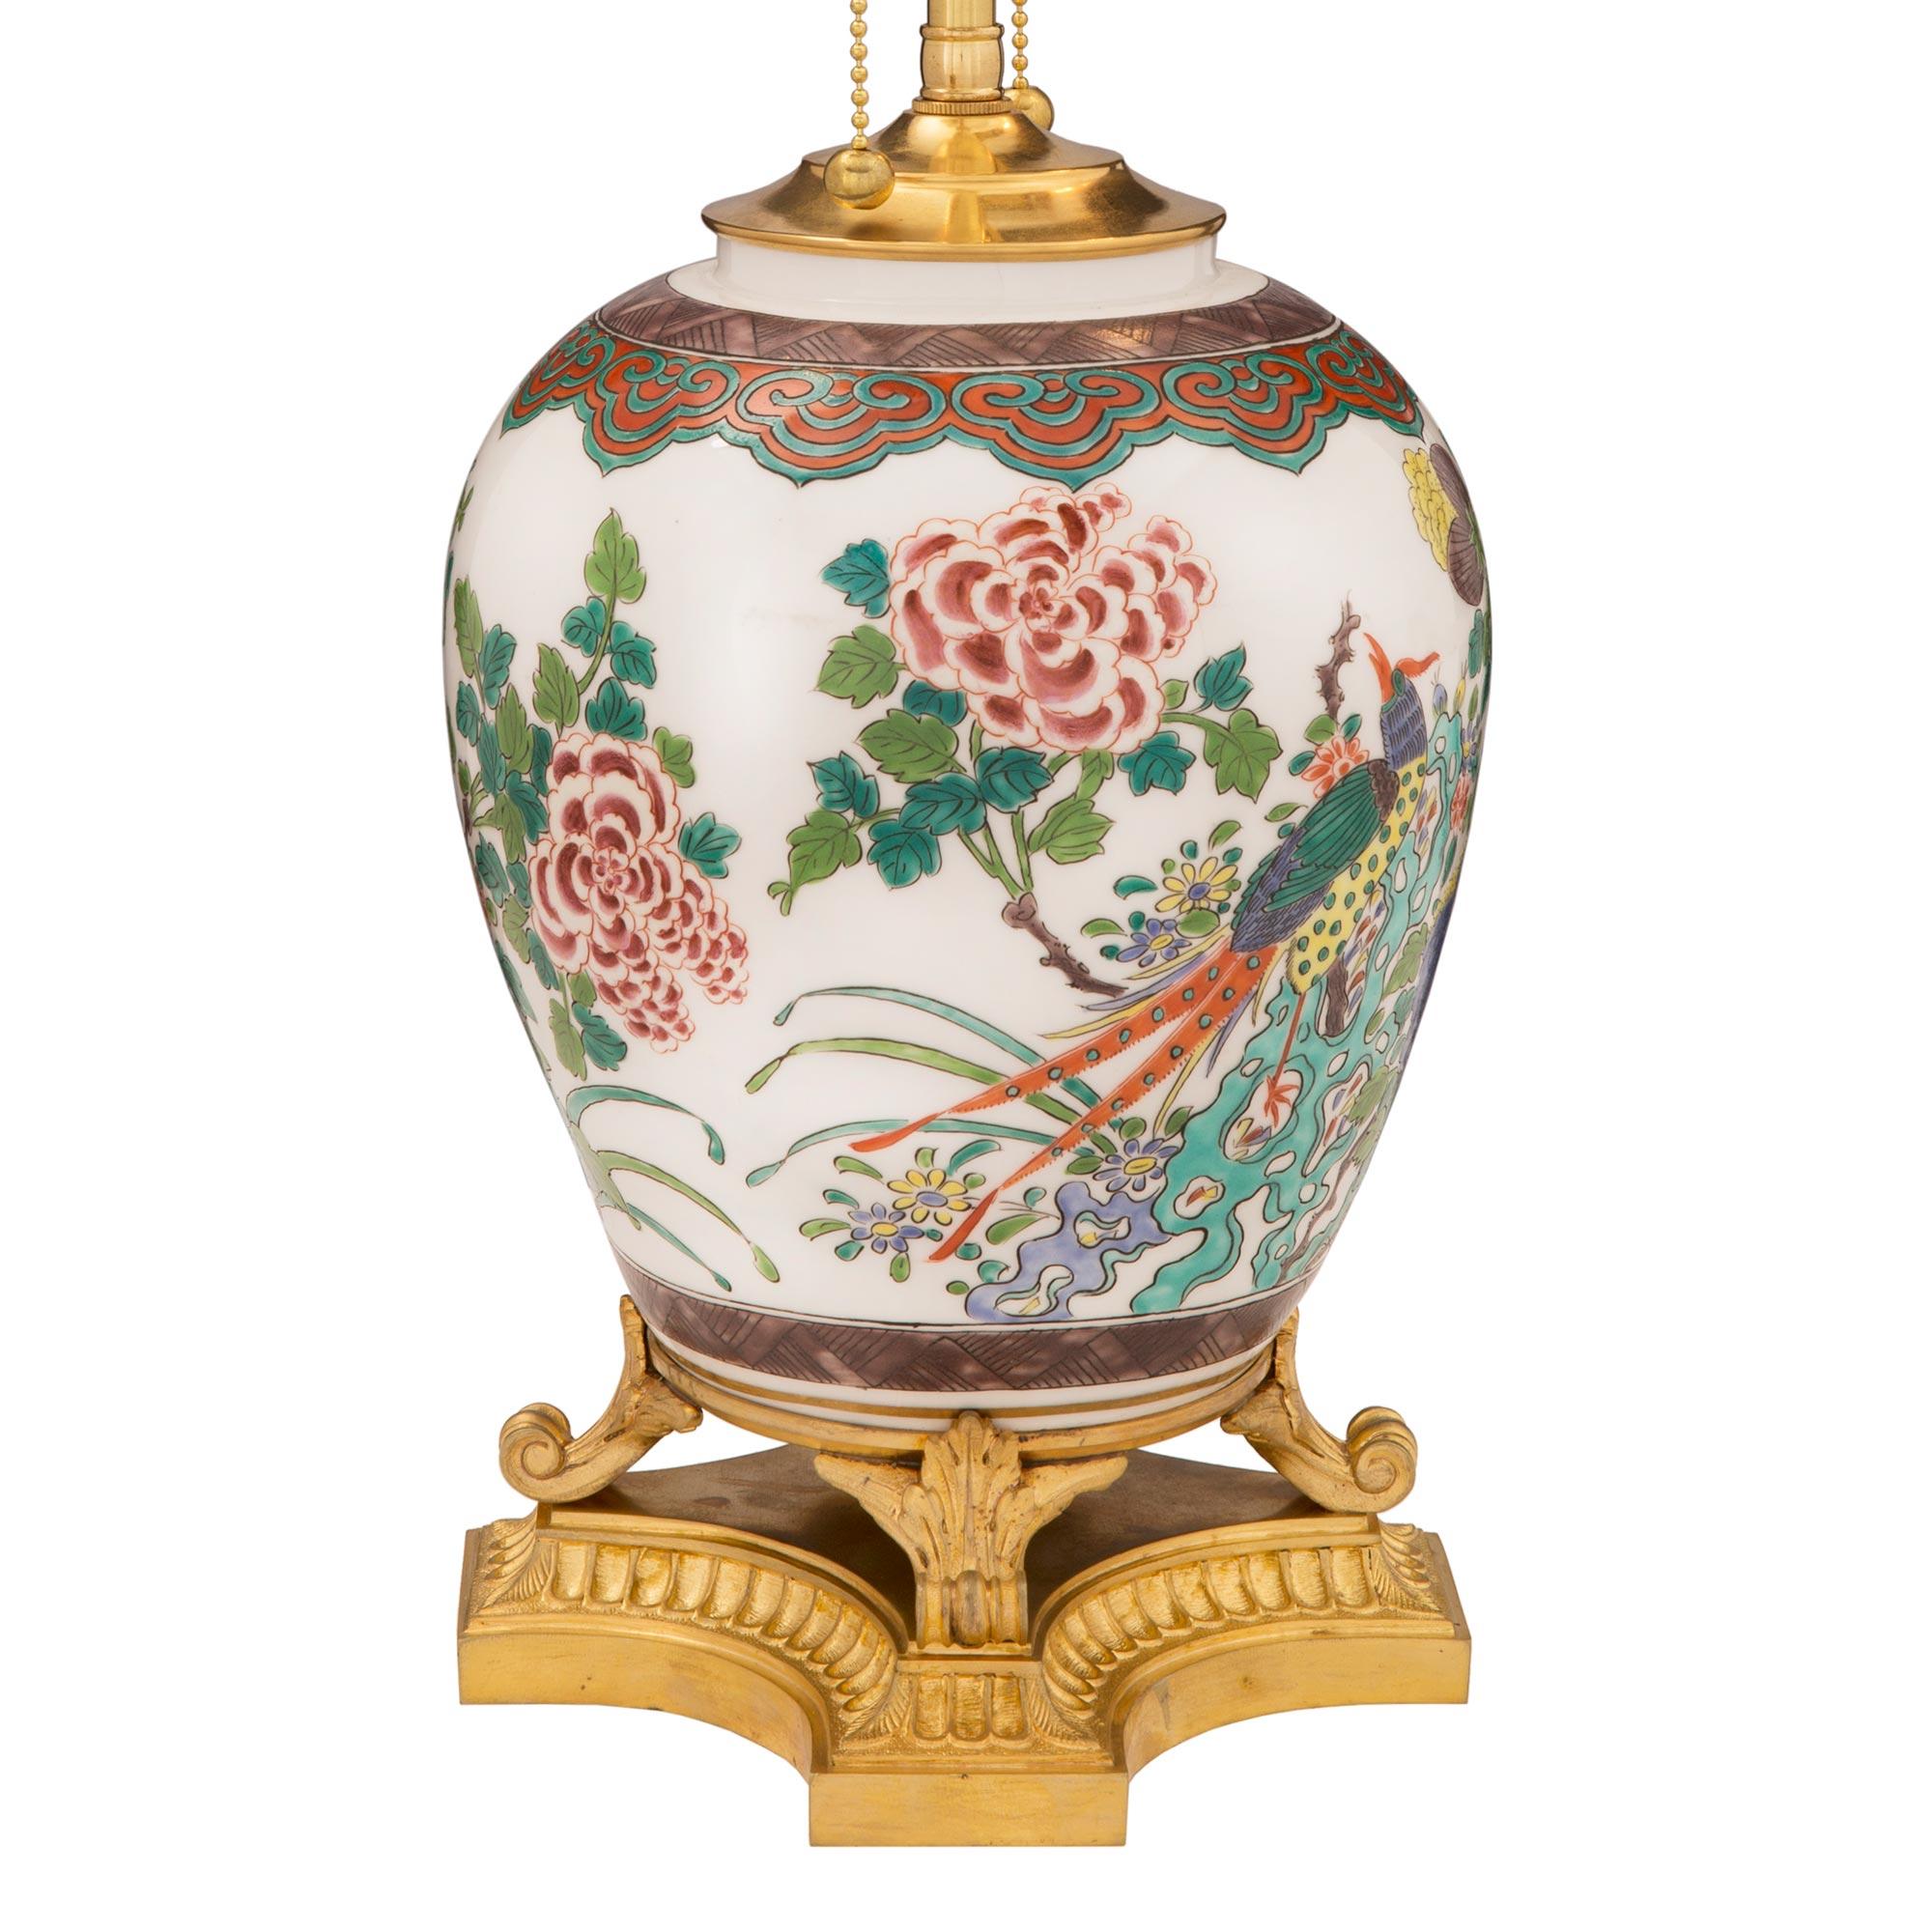 A beautiful Chinese Export 19th century Famille Verte porcelain lamp with French 19th century Louis XVI st. ormolu mounts. The lamp is raised by a most elegant ormolu base with concave sides, a fine decorative wrap around pattern and four charming